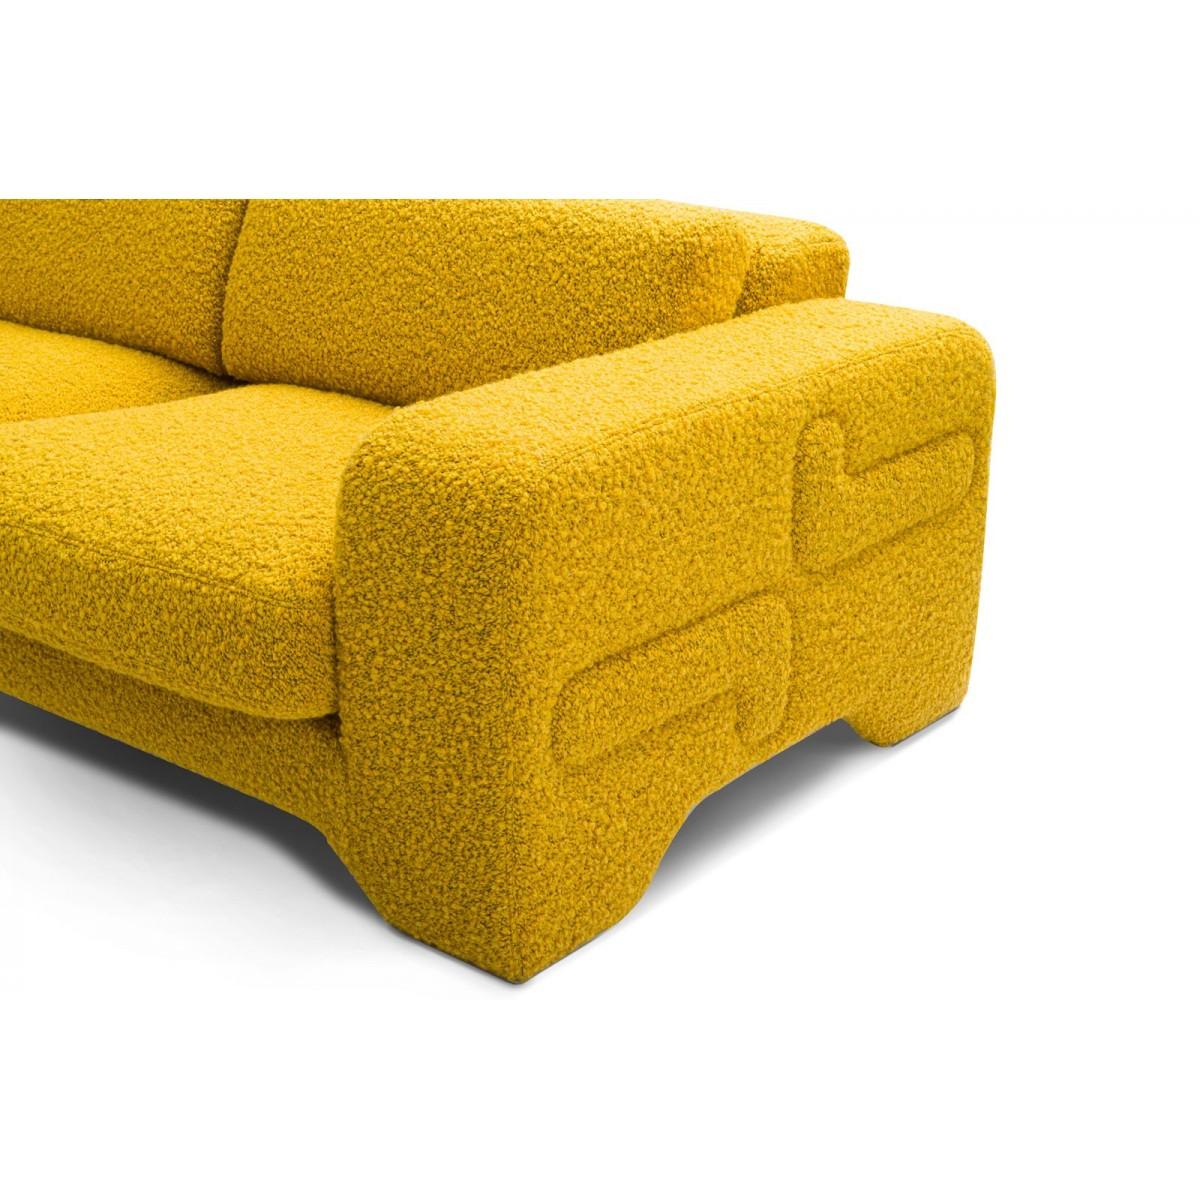 Contemporary Popus Editions Giovanna 2.5 Seater Sofa in Amber Athena Loop Yarn Fabric For Sale